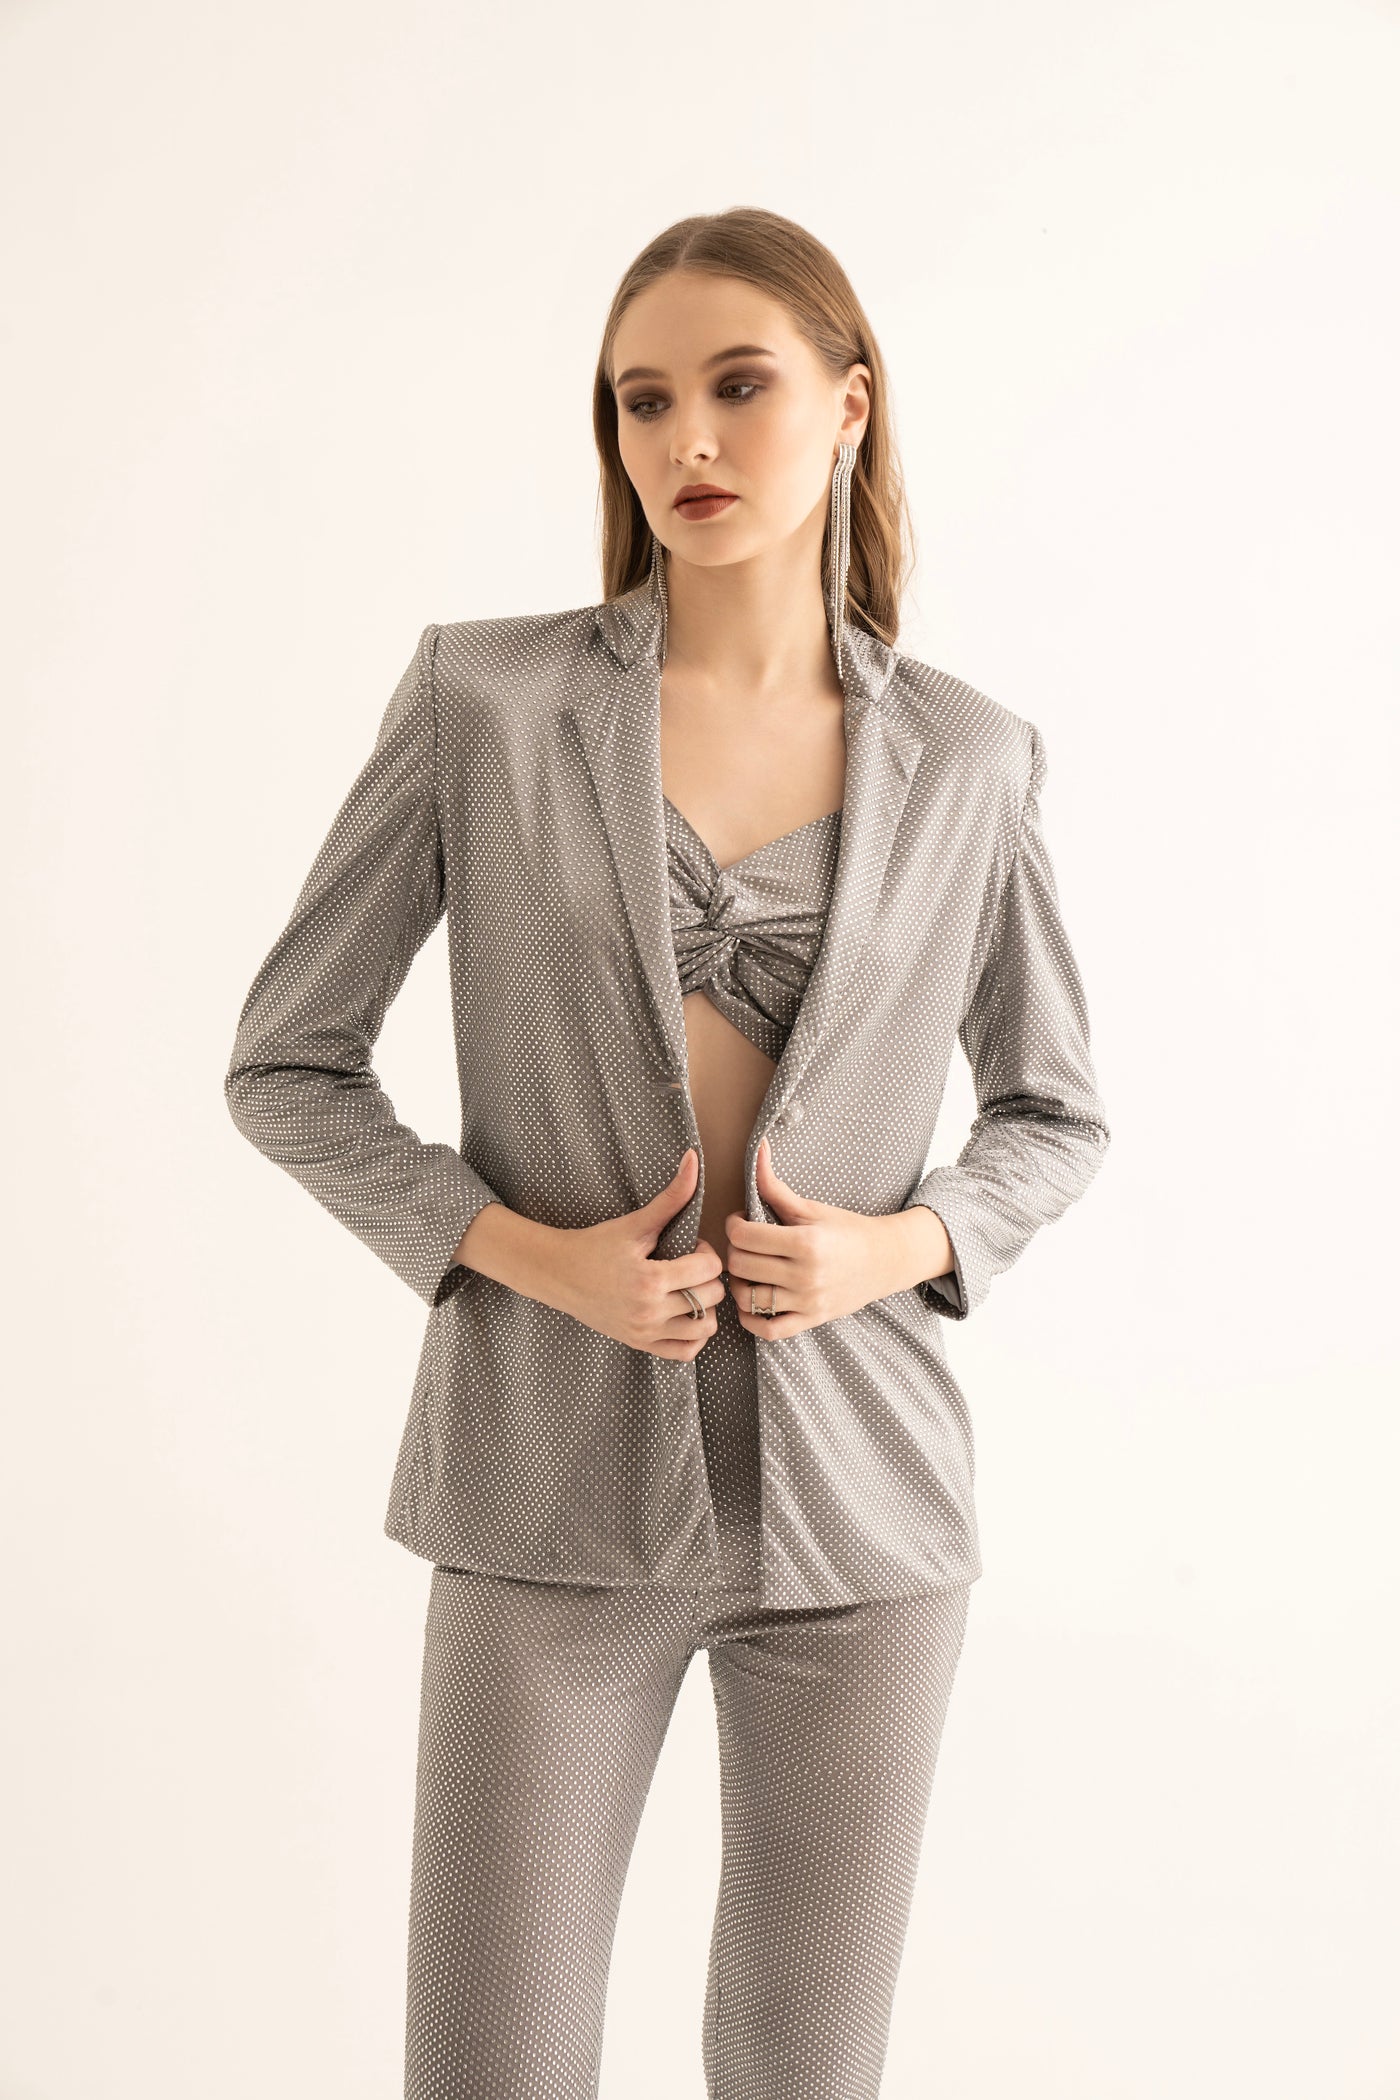 Silver Rhinestone Blazer and Bell Bottoms Co-ord